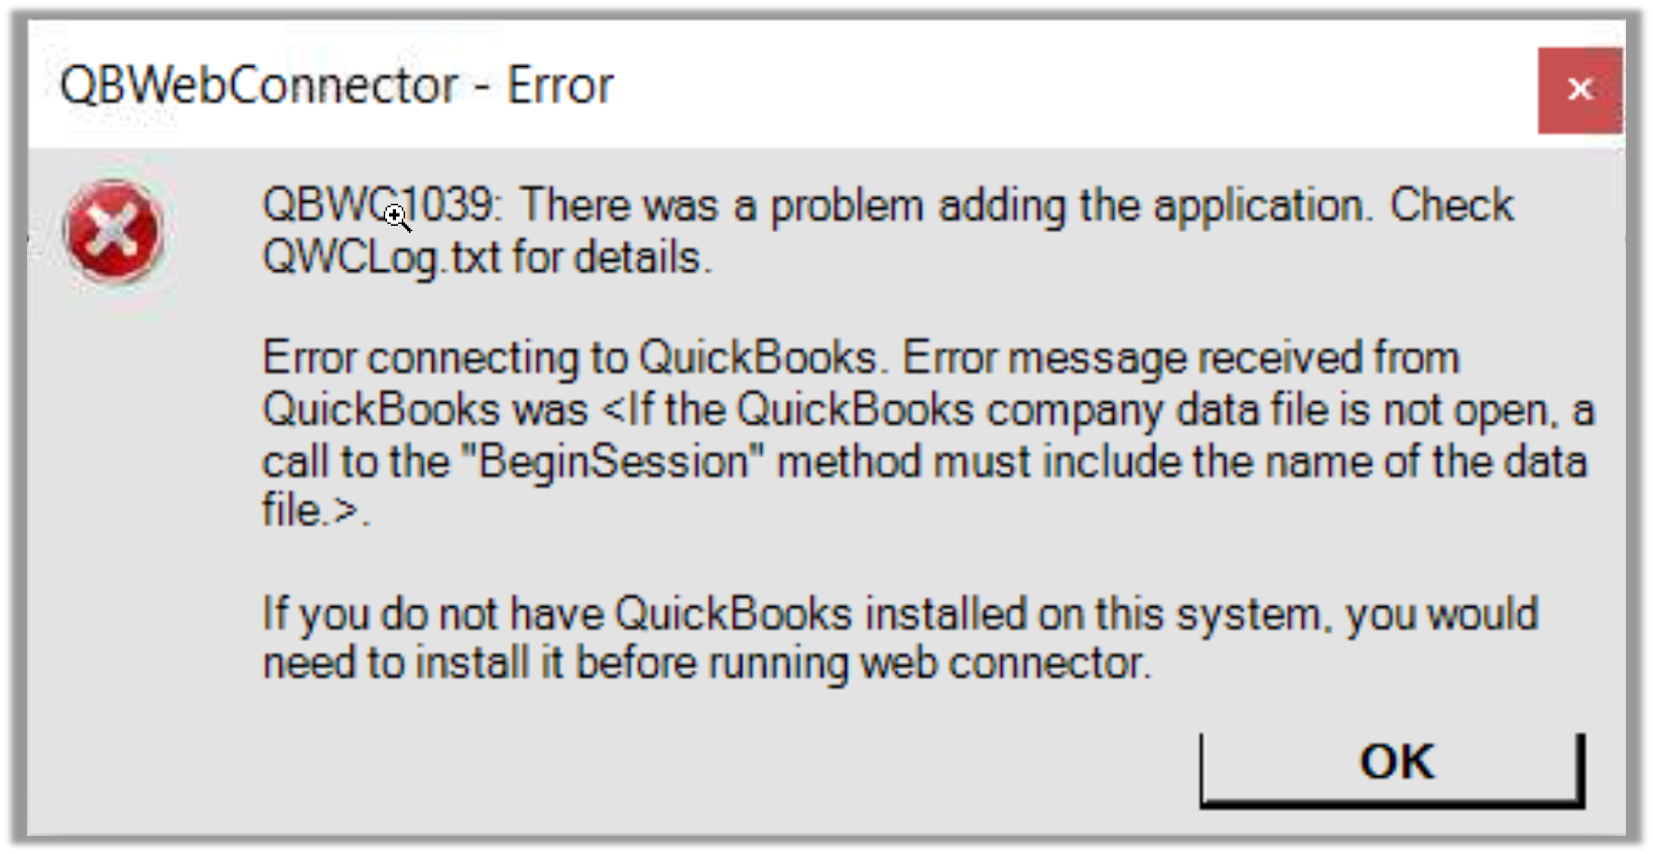 Error connecting to QuickBooks was If the QuickBooks company data file is not open, a call to the BeginSession method must include the name of the data file